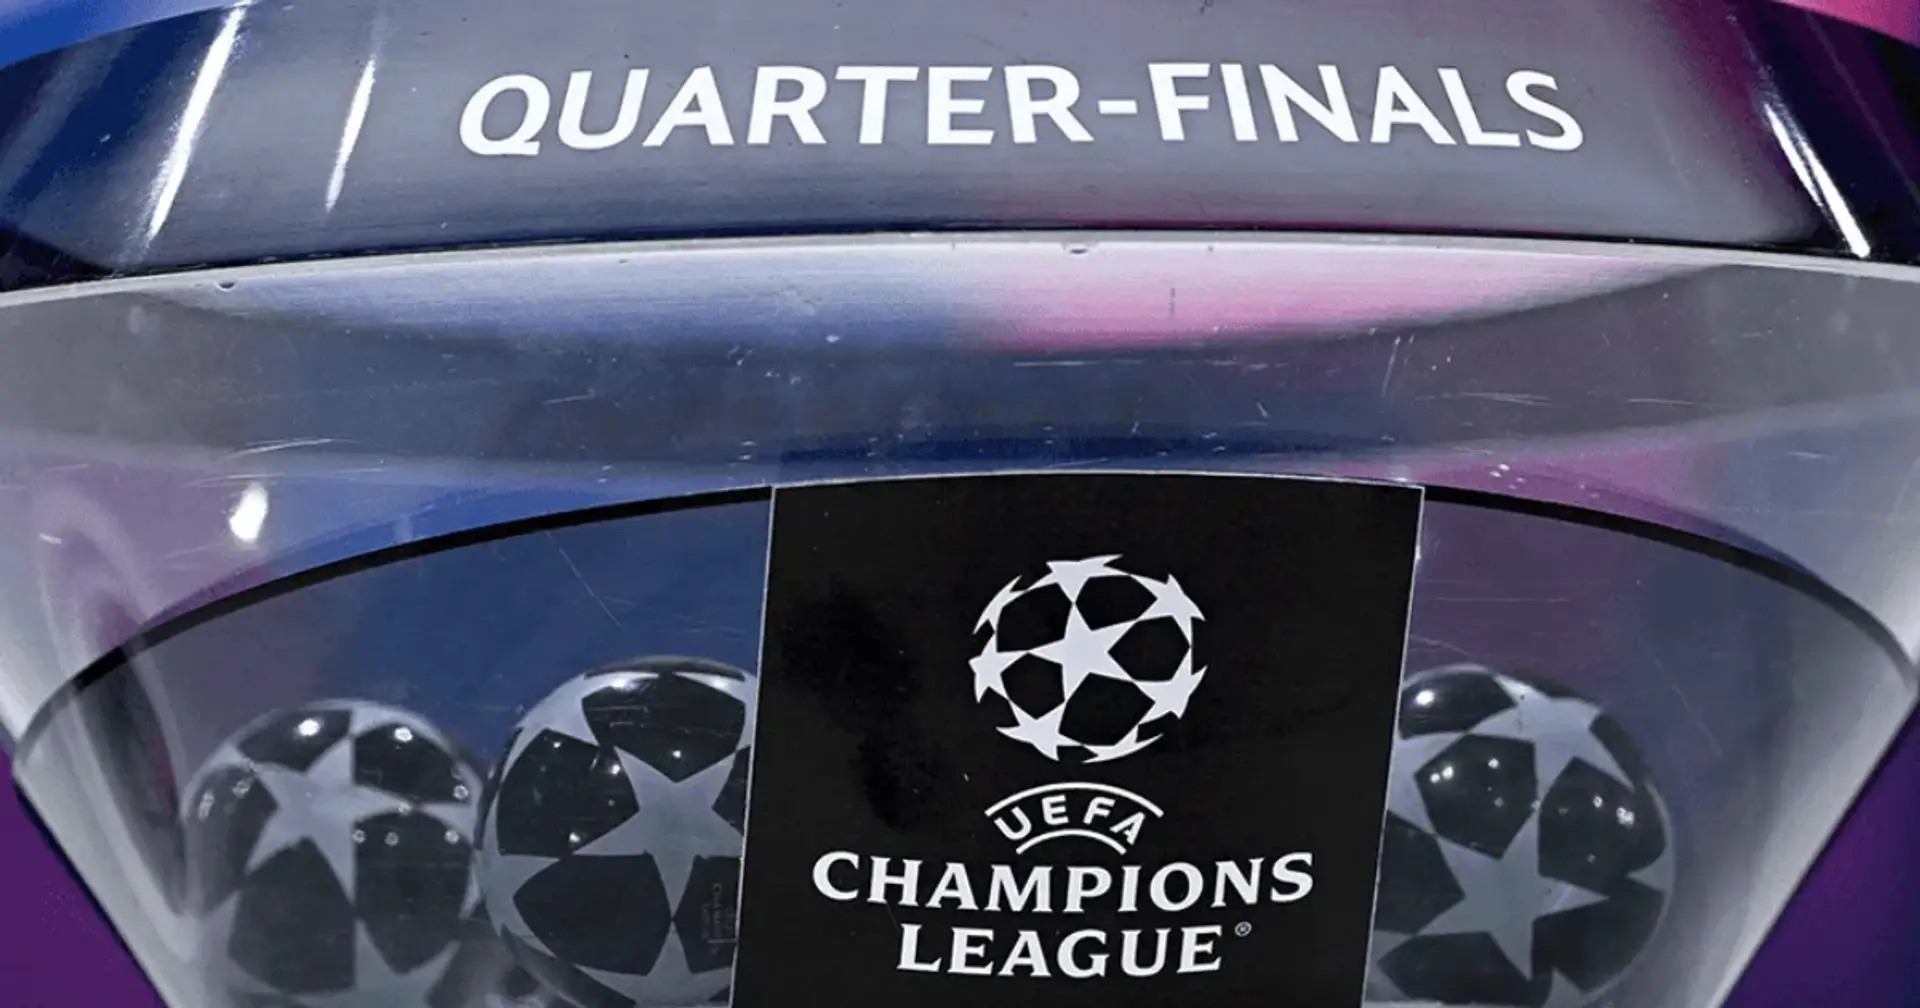 Arsenal to face Bayern in Champions League quarter-finals, potential semi-final opponents revealed